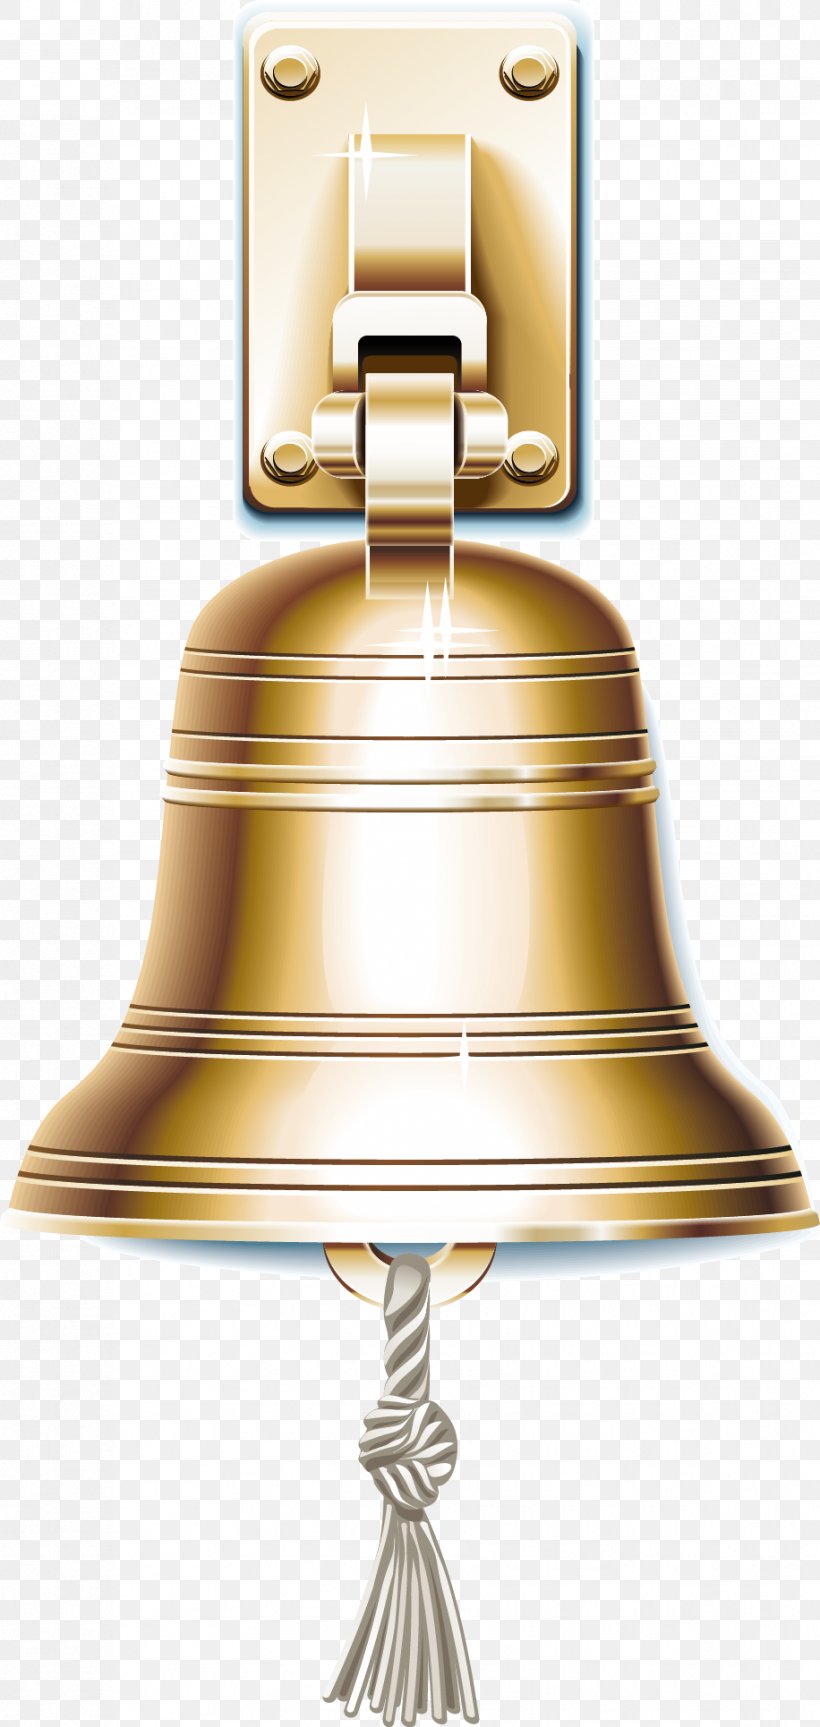 Royalty-free Drawing Icon, PNG, 916x1930px, Royaltyfree, Bell, Brass, Church Bell, Drawing Download Free